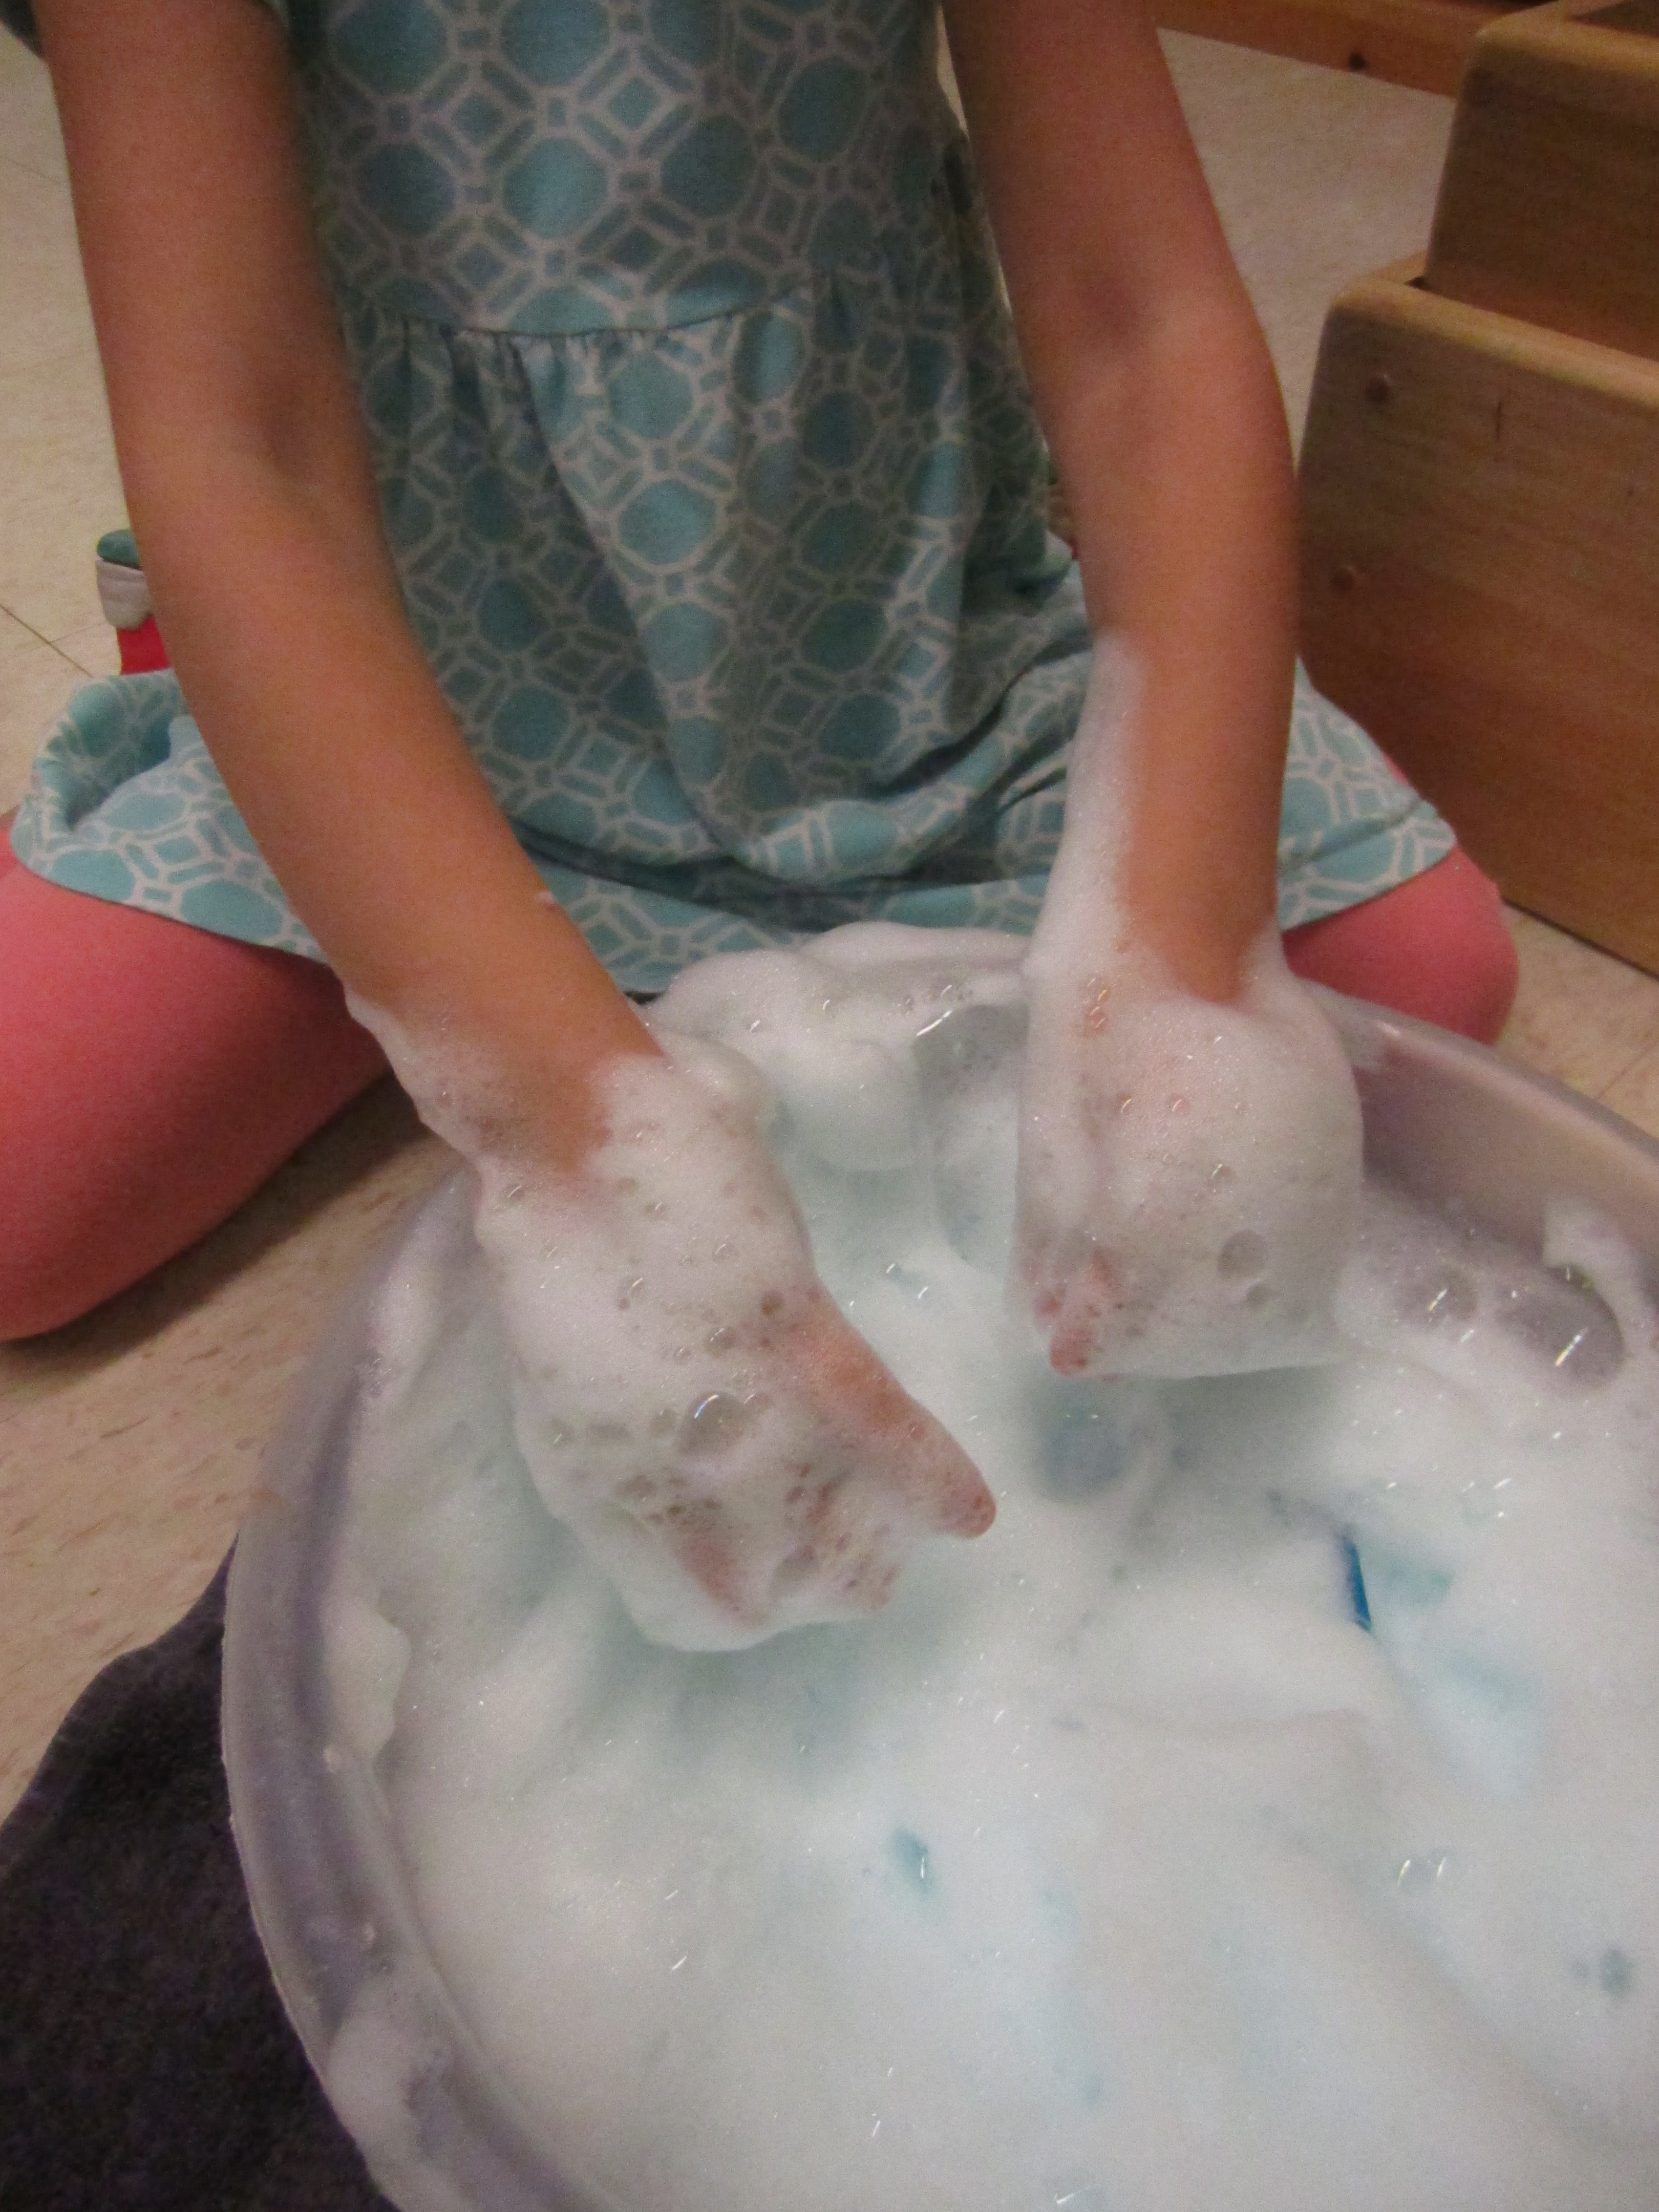 Child has two hands in a bowl of soap foam.